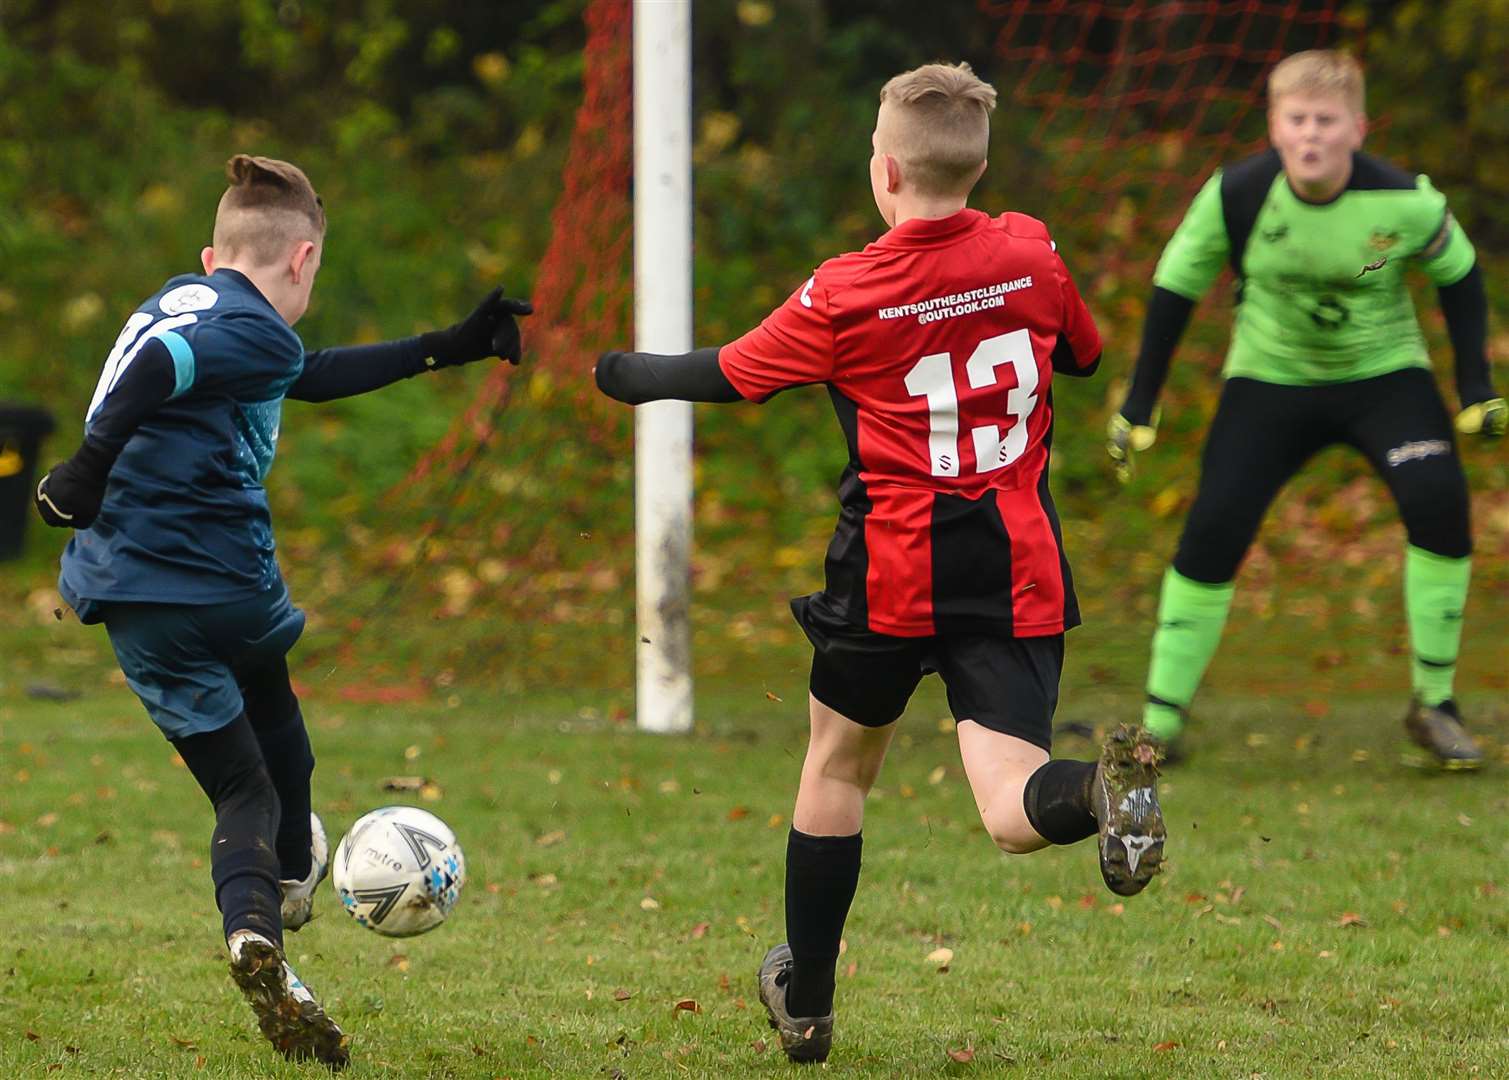 Hempstead Valley under-13s go for goal against Woodcoombe Youth under-13s. Picture: Alan Langley FM21837873